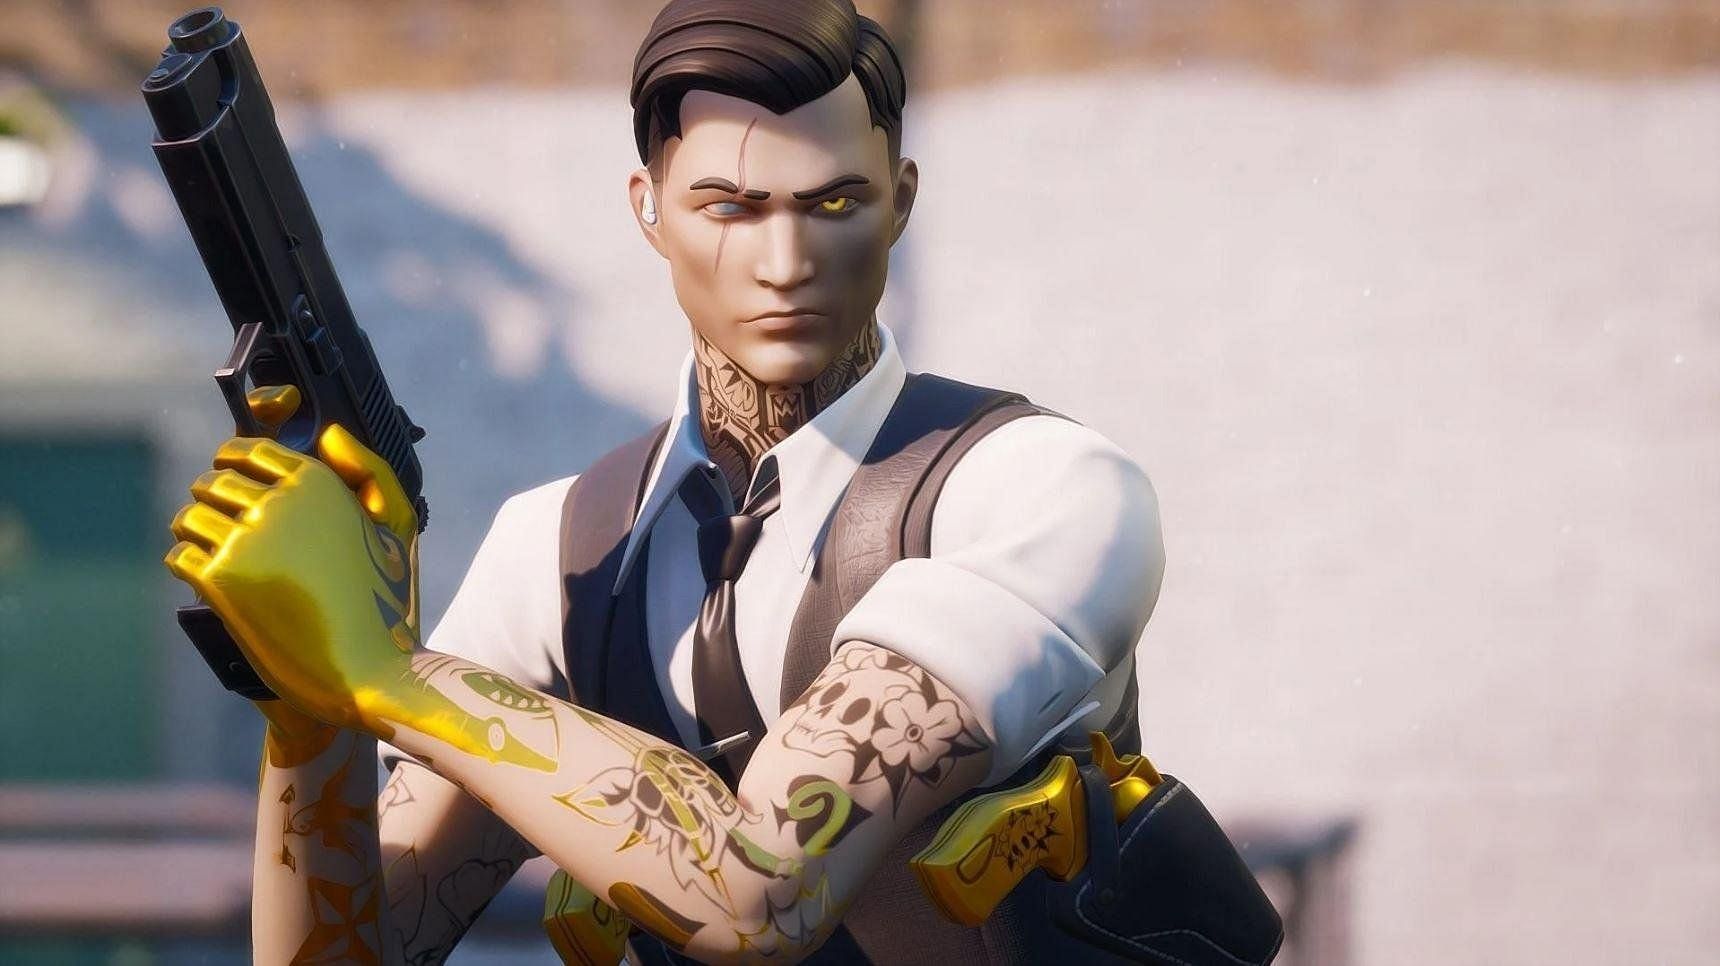 Midas is another important Fortnite character (Image via Epic Games)